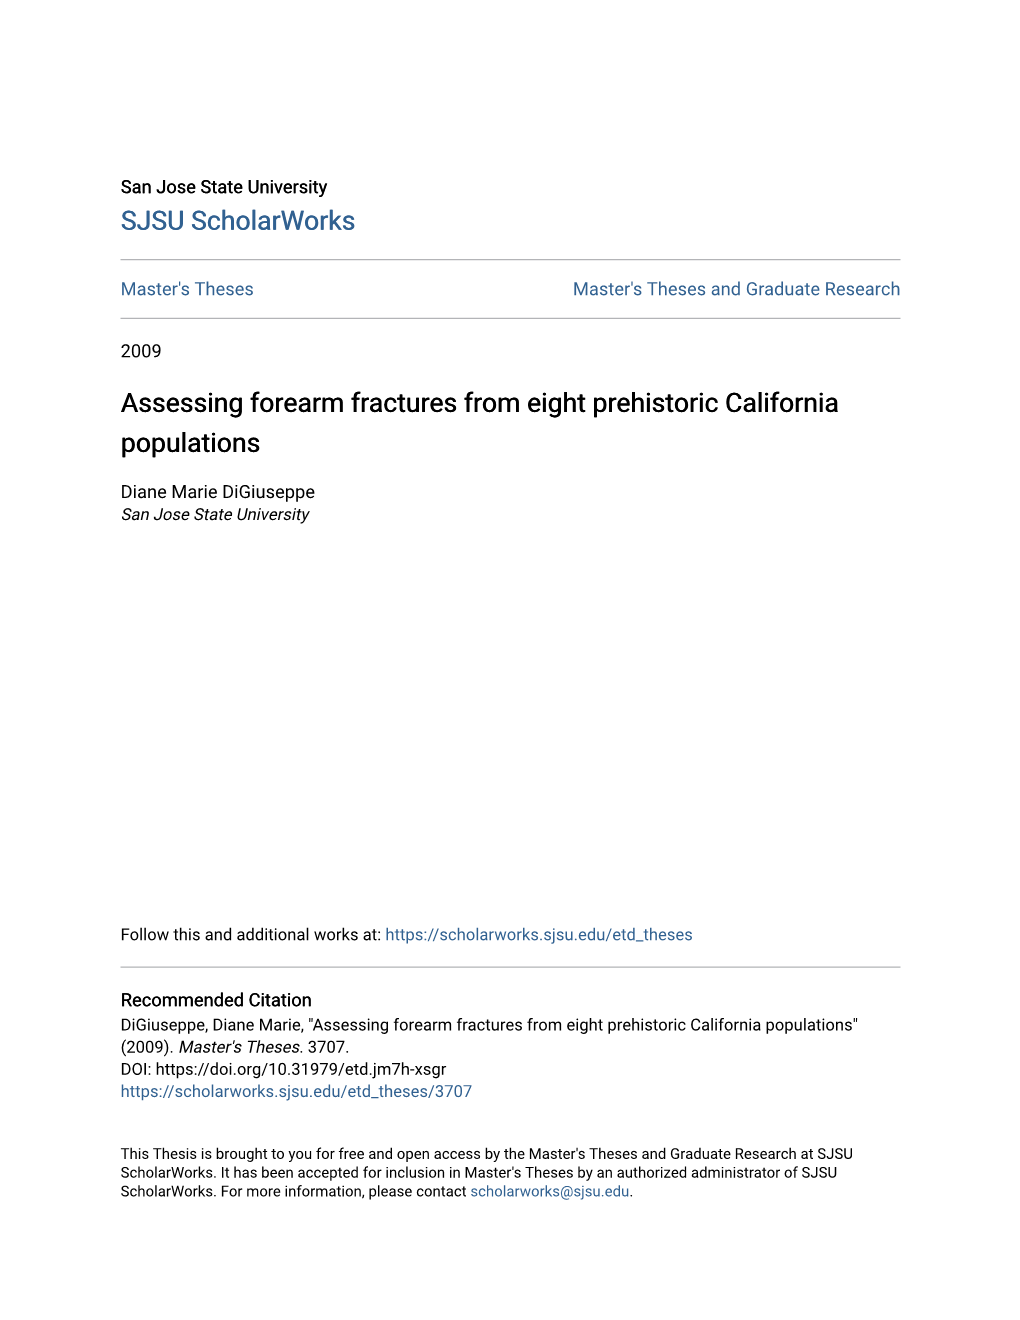 Assessing Forearm Fractures from Eight Prehistoric California Populations